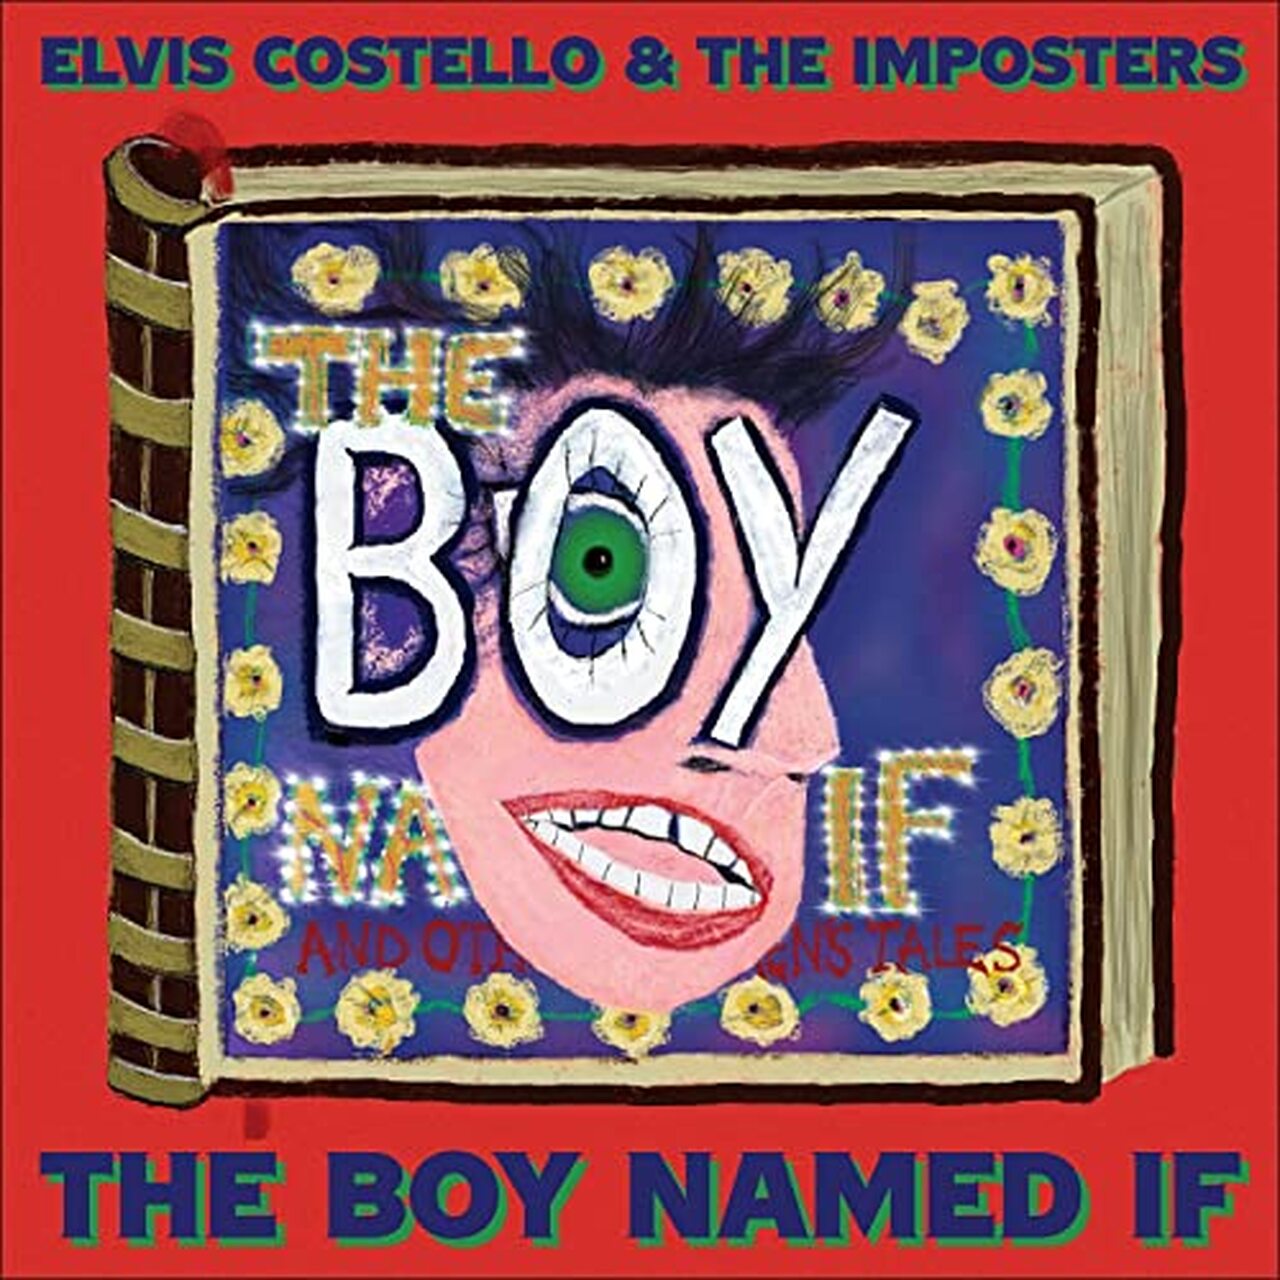 Art for The Boy Named If by Elvis Costello & The Imposters